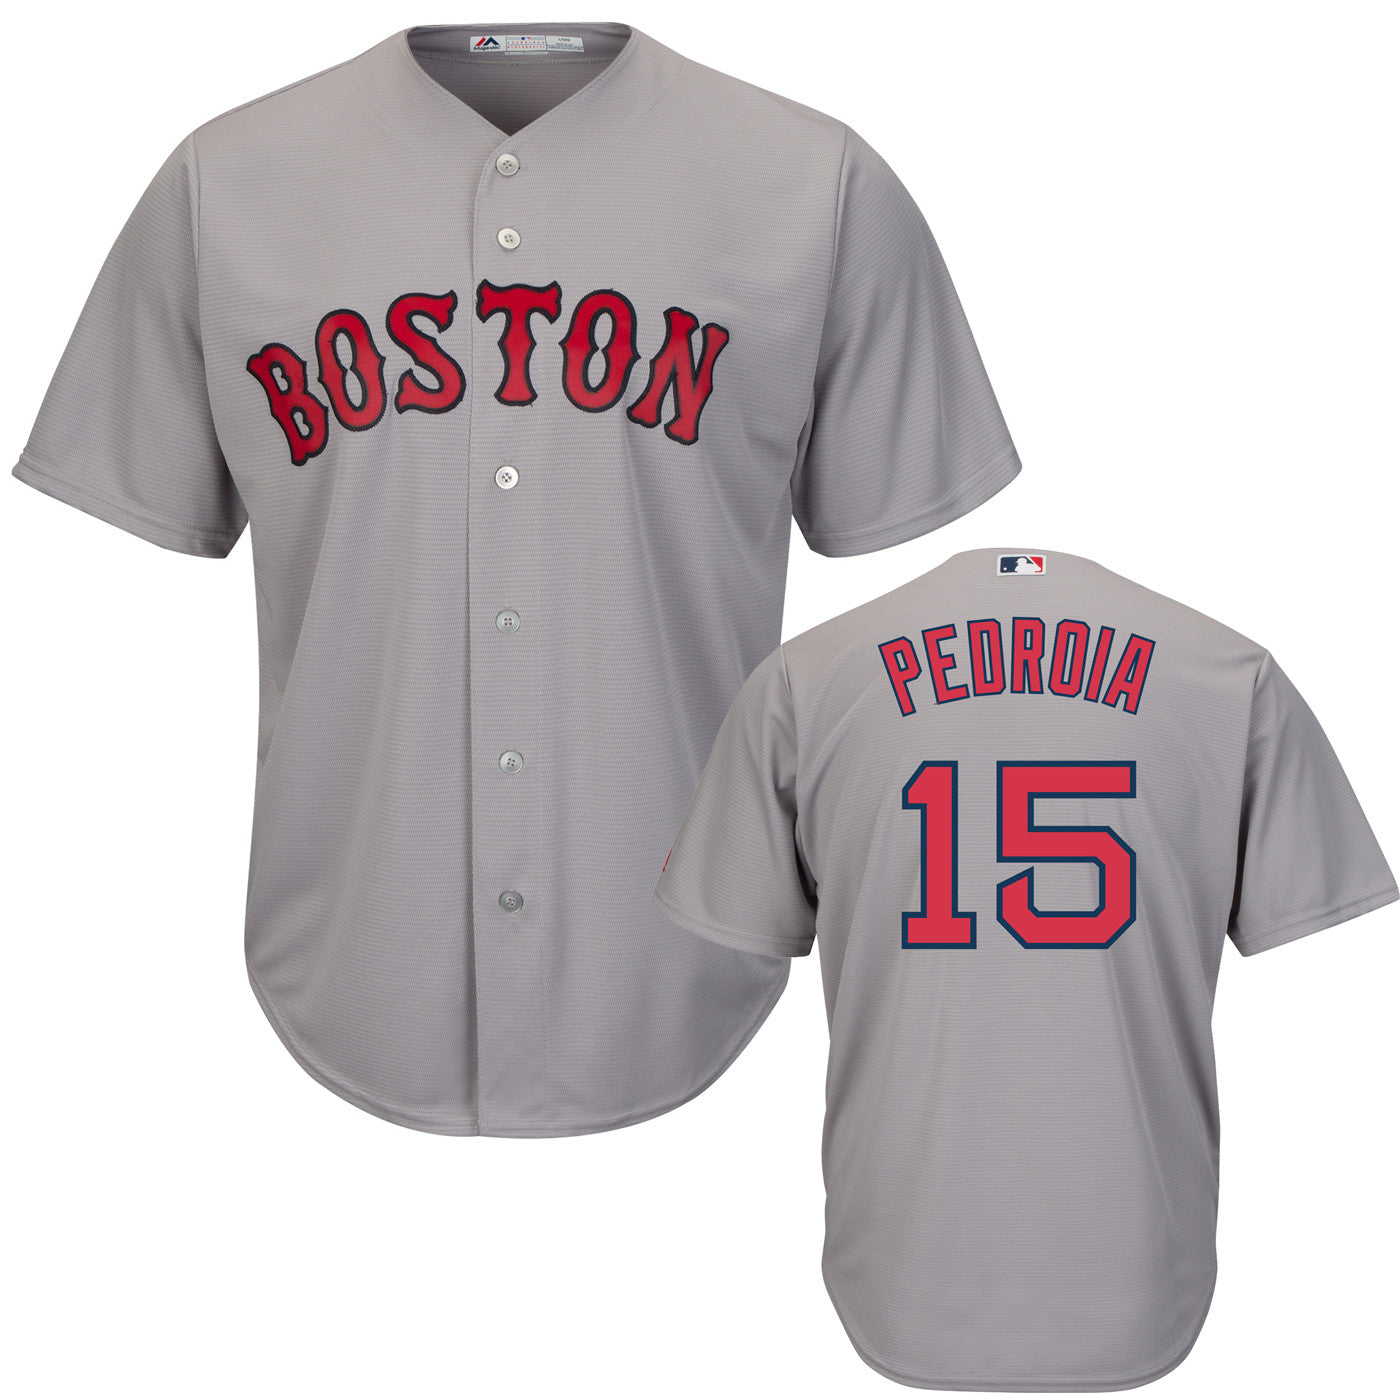 red sox 15 jersey